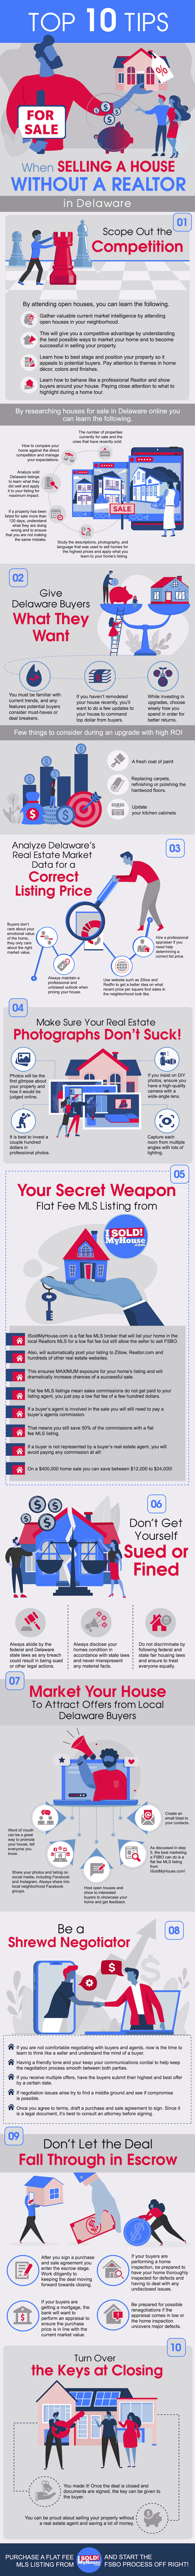 infographic of the 10 steps to sell a house in delaware without an agent